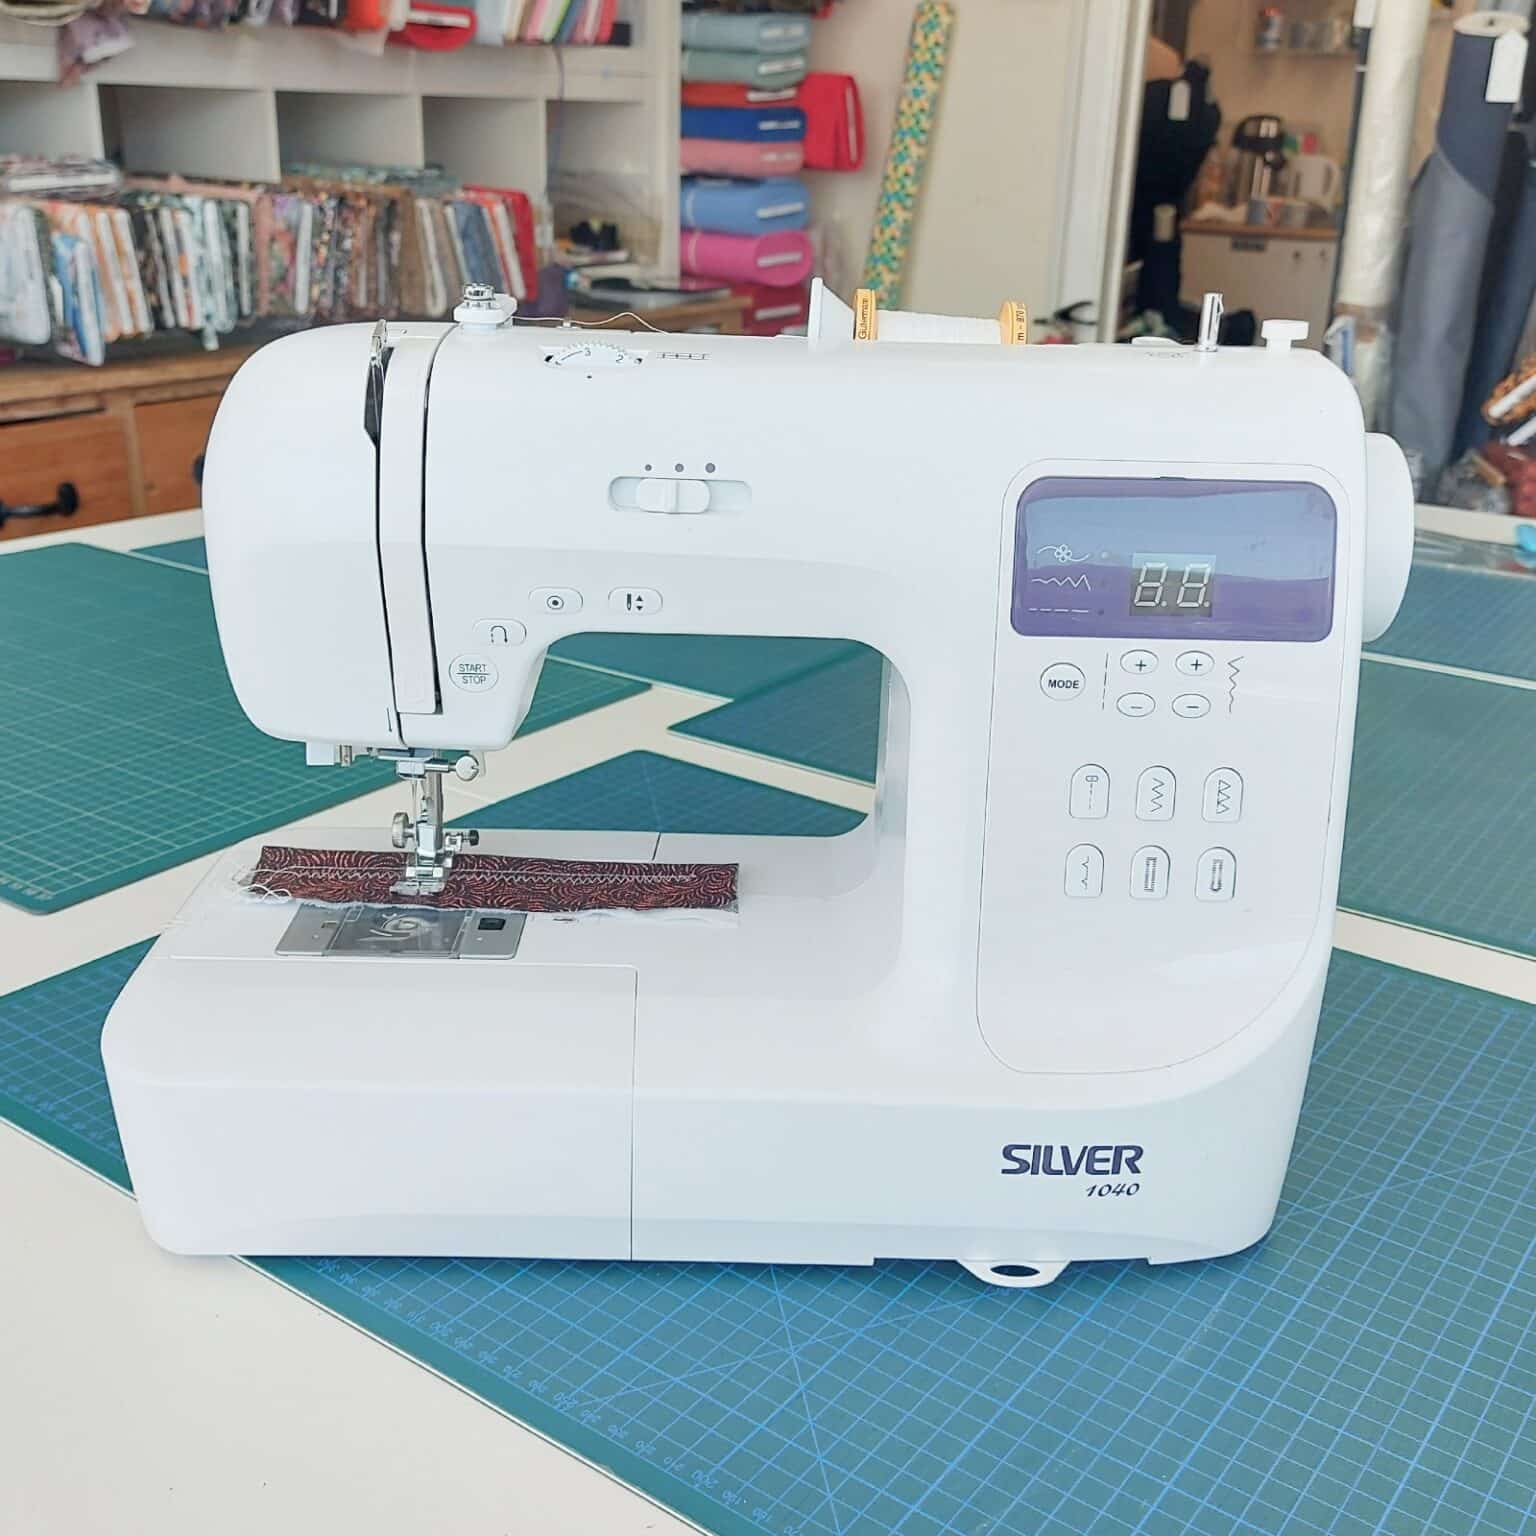 silver 1040 sewing machine | More Sewing